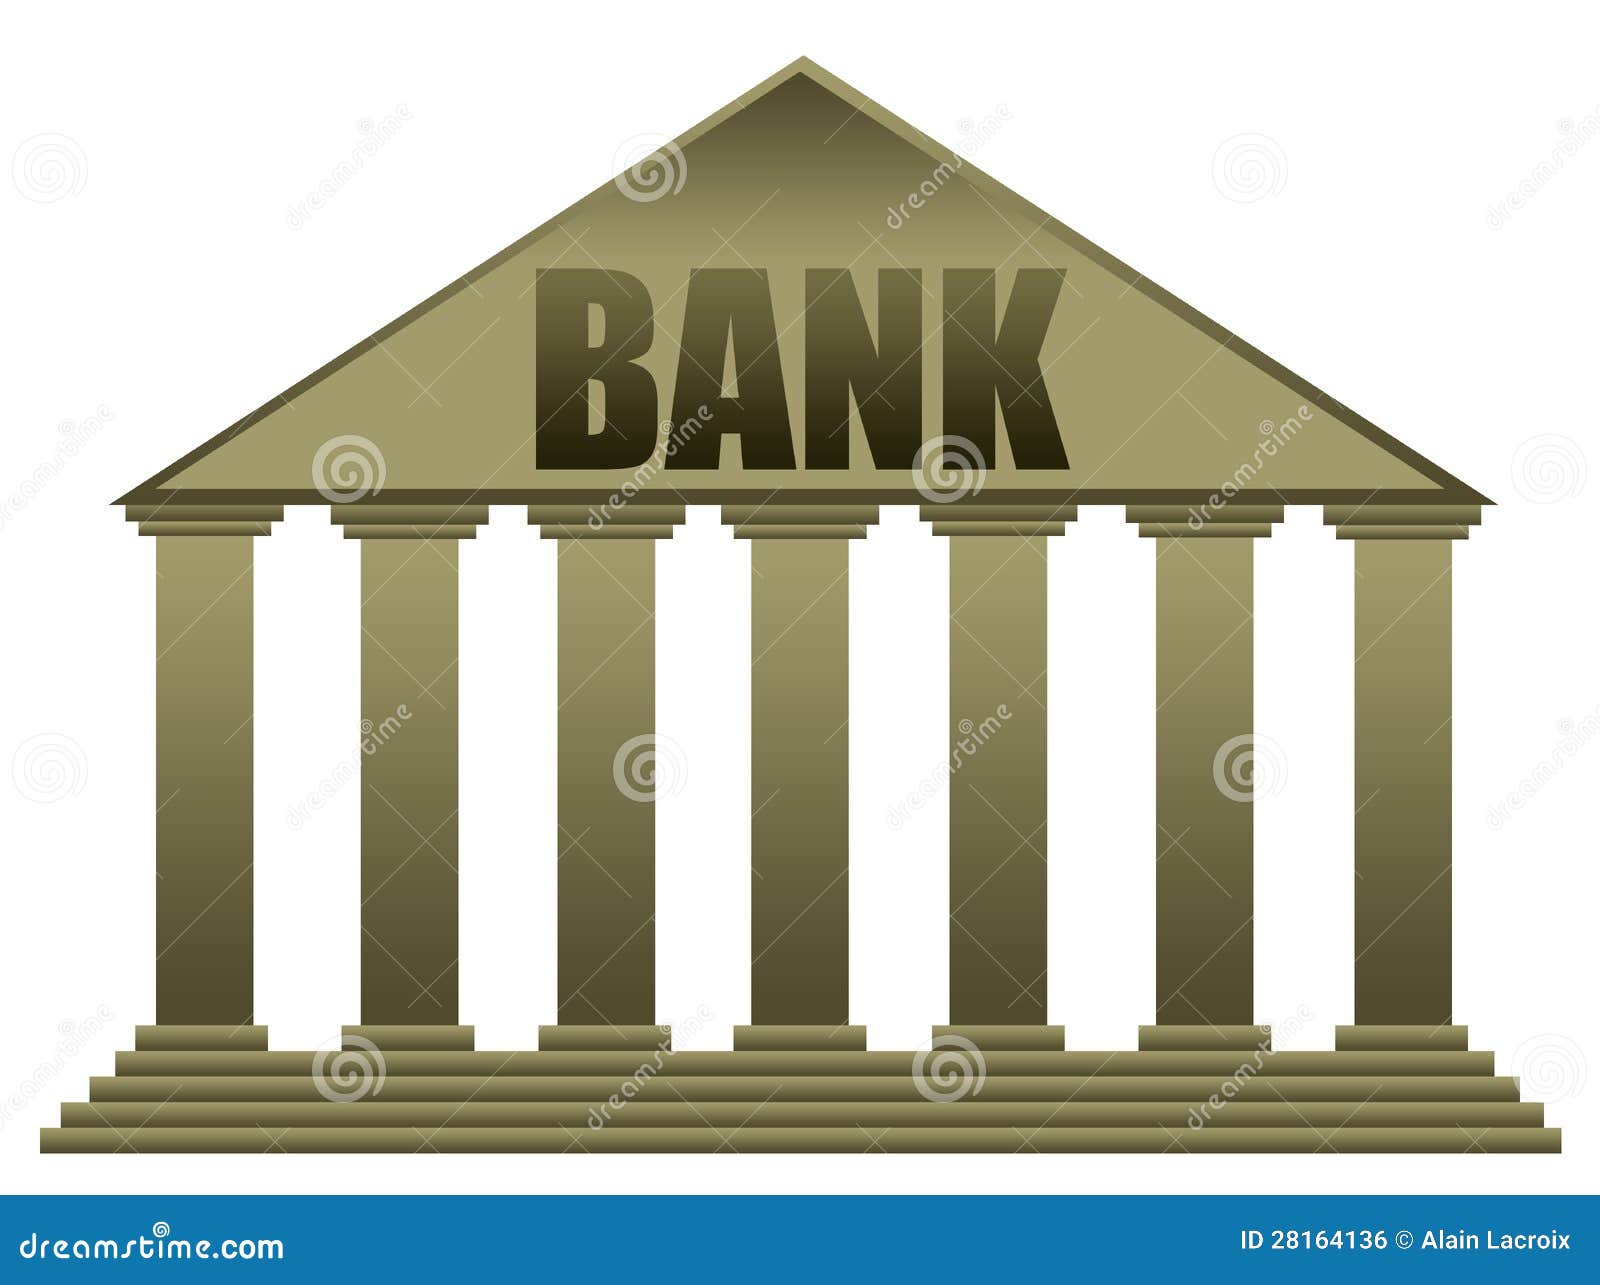 free clipart bank building - photo #19